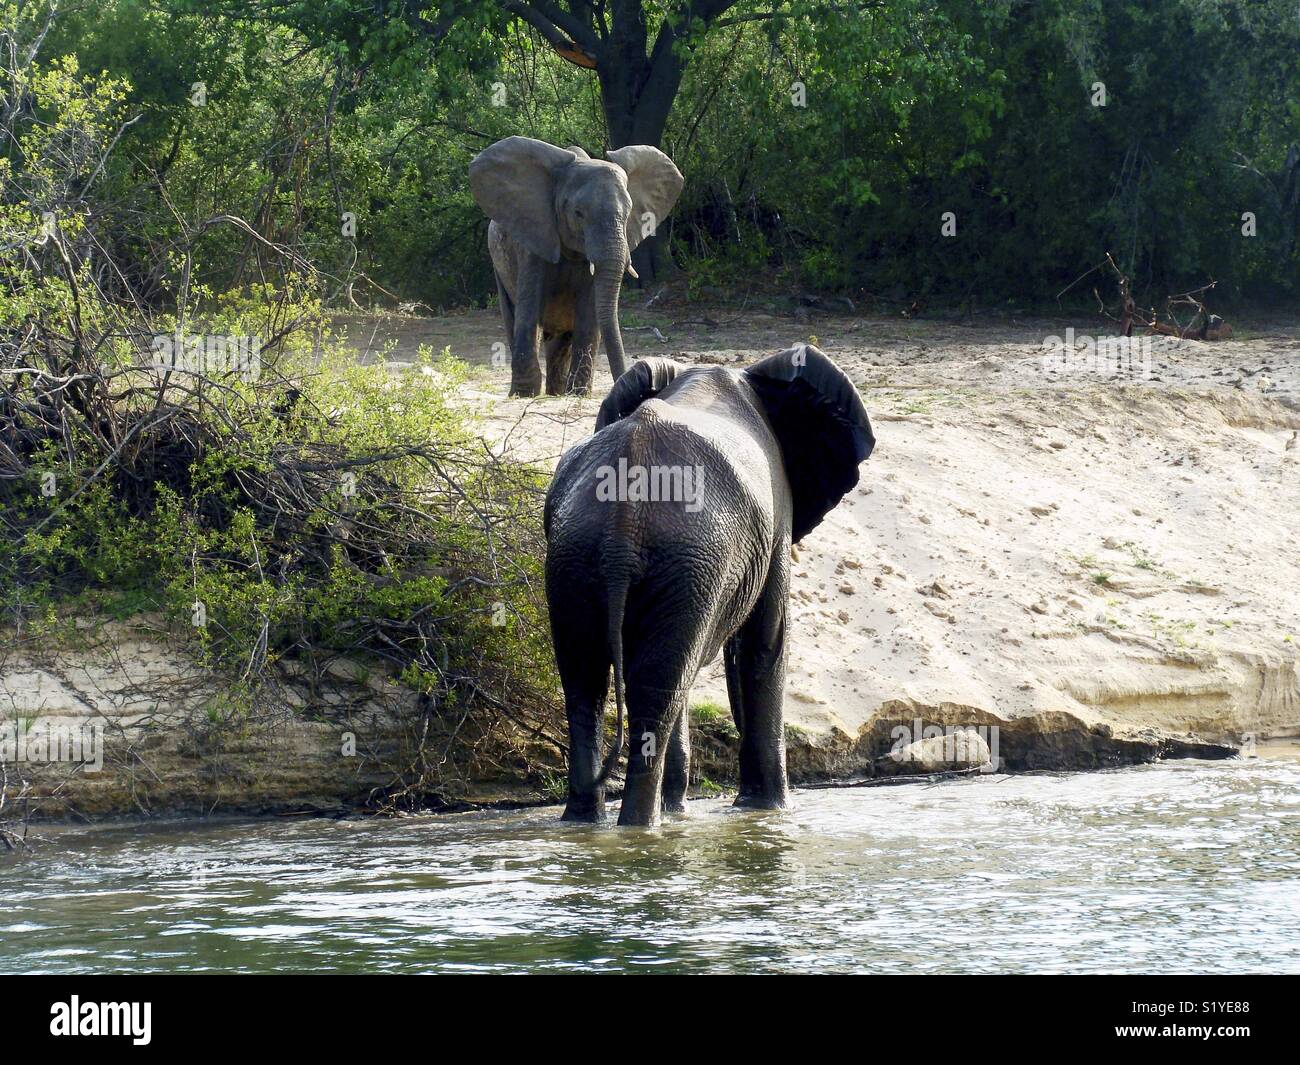 An elephant bull rises from the water and meets another elephant on the shore Stock Photo